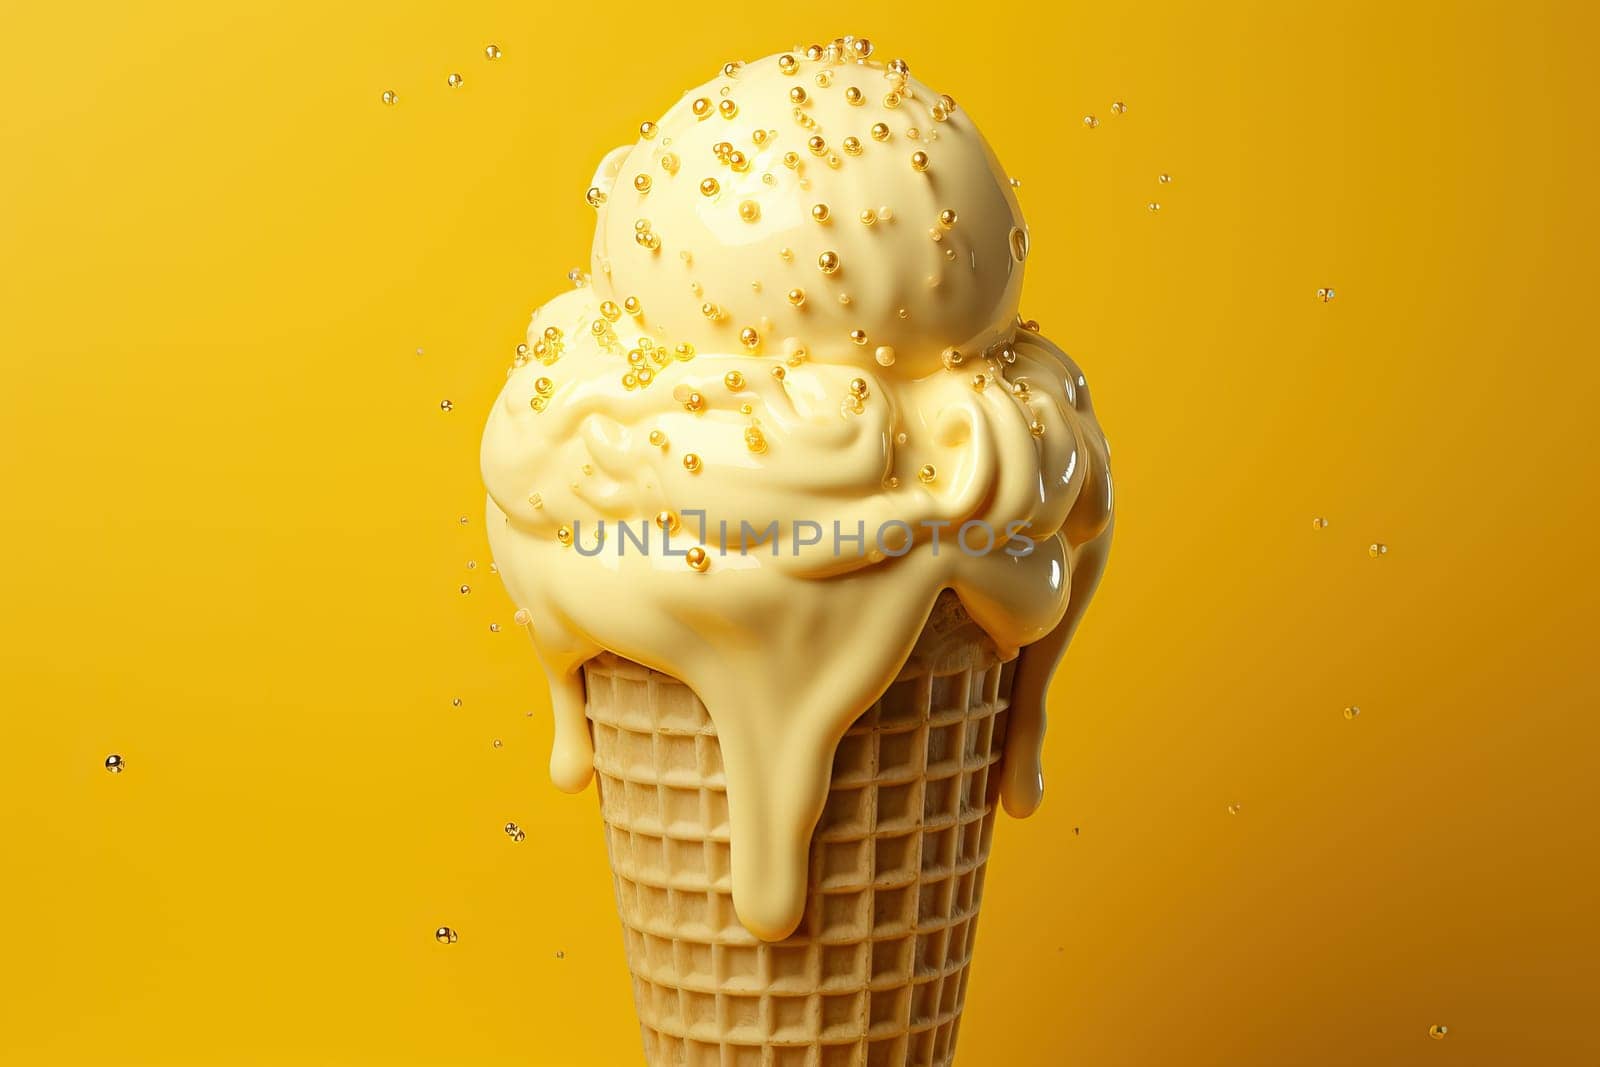 Banana ice cream cone with balls on yellow background close-up for banner.